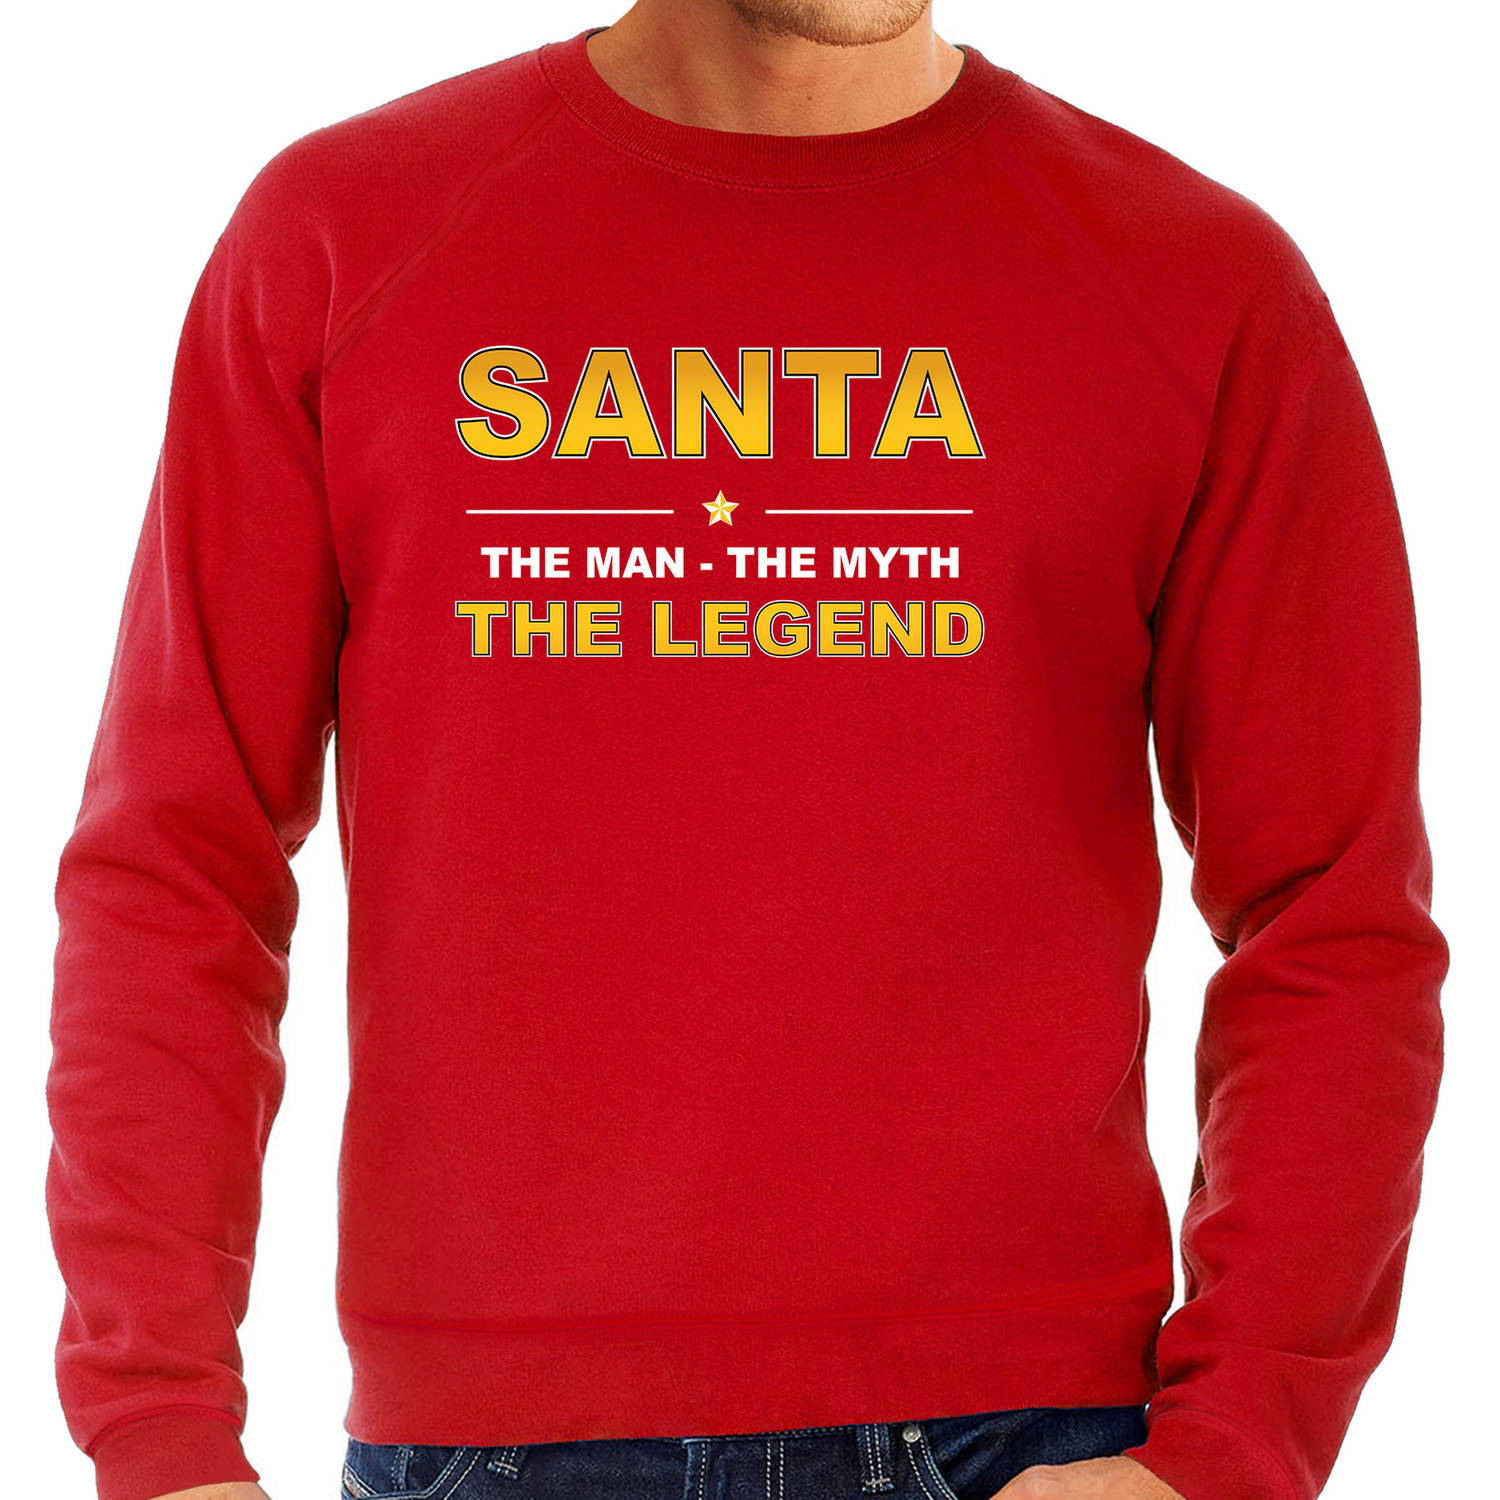 The man, The myth the legend Santa sweater / trui rood voor heren L - kerst truien